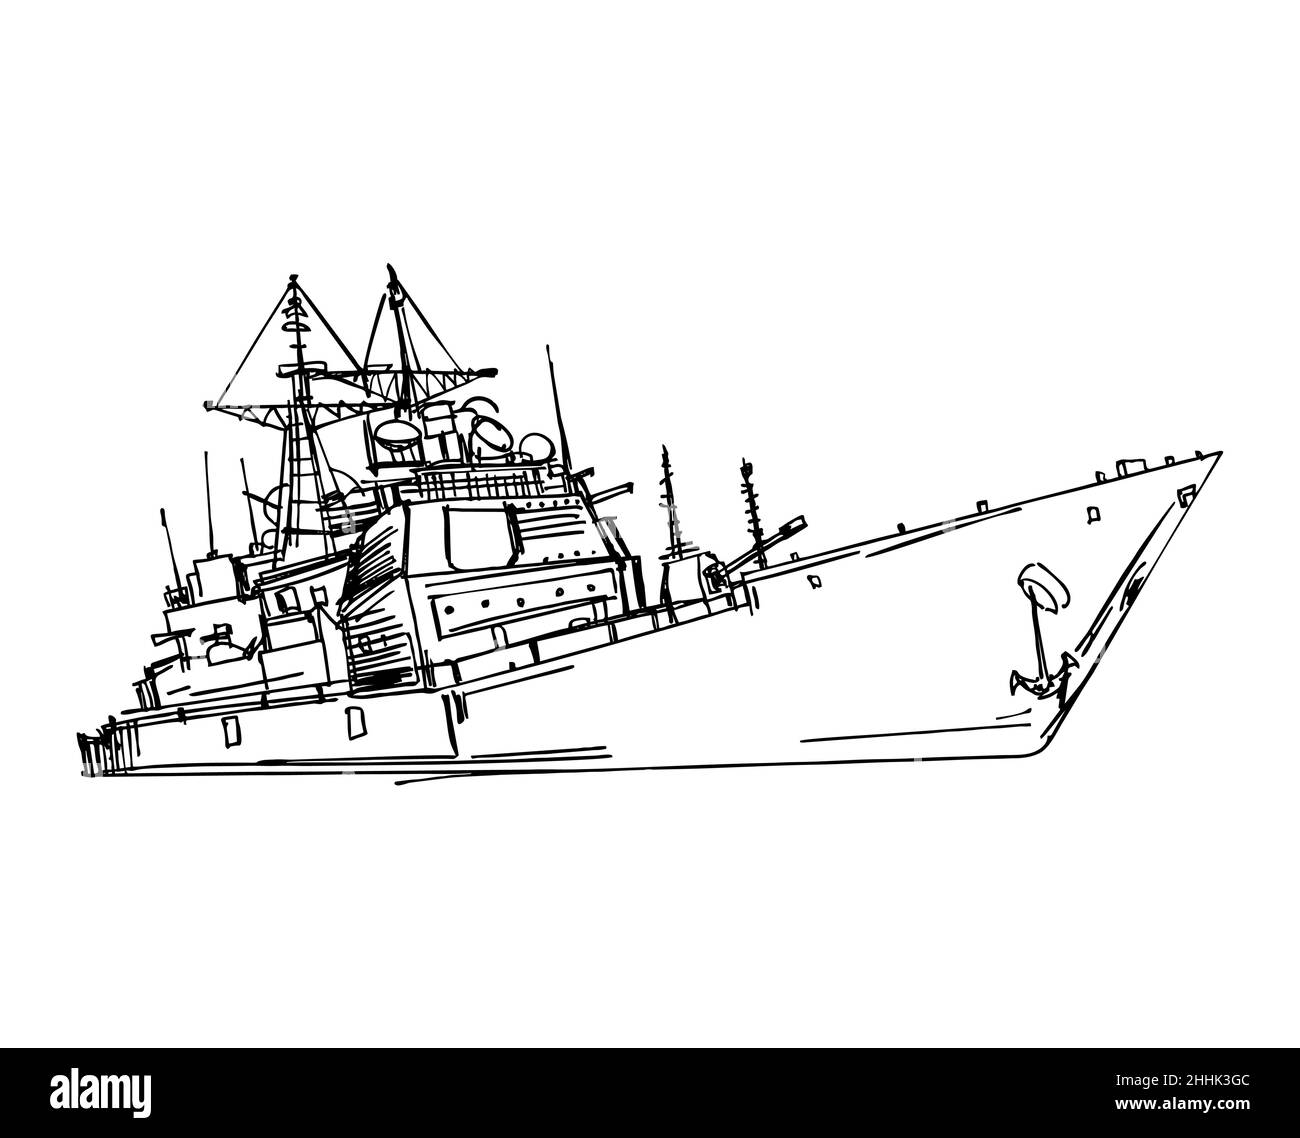 Military ship hand drawing. Aircraft carrier sketch. Vector illustration Stock Vector